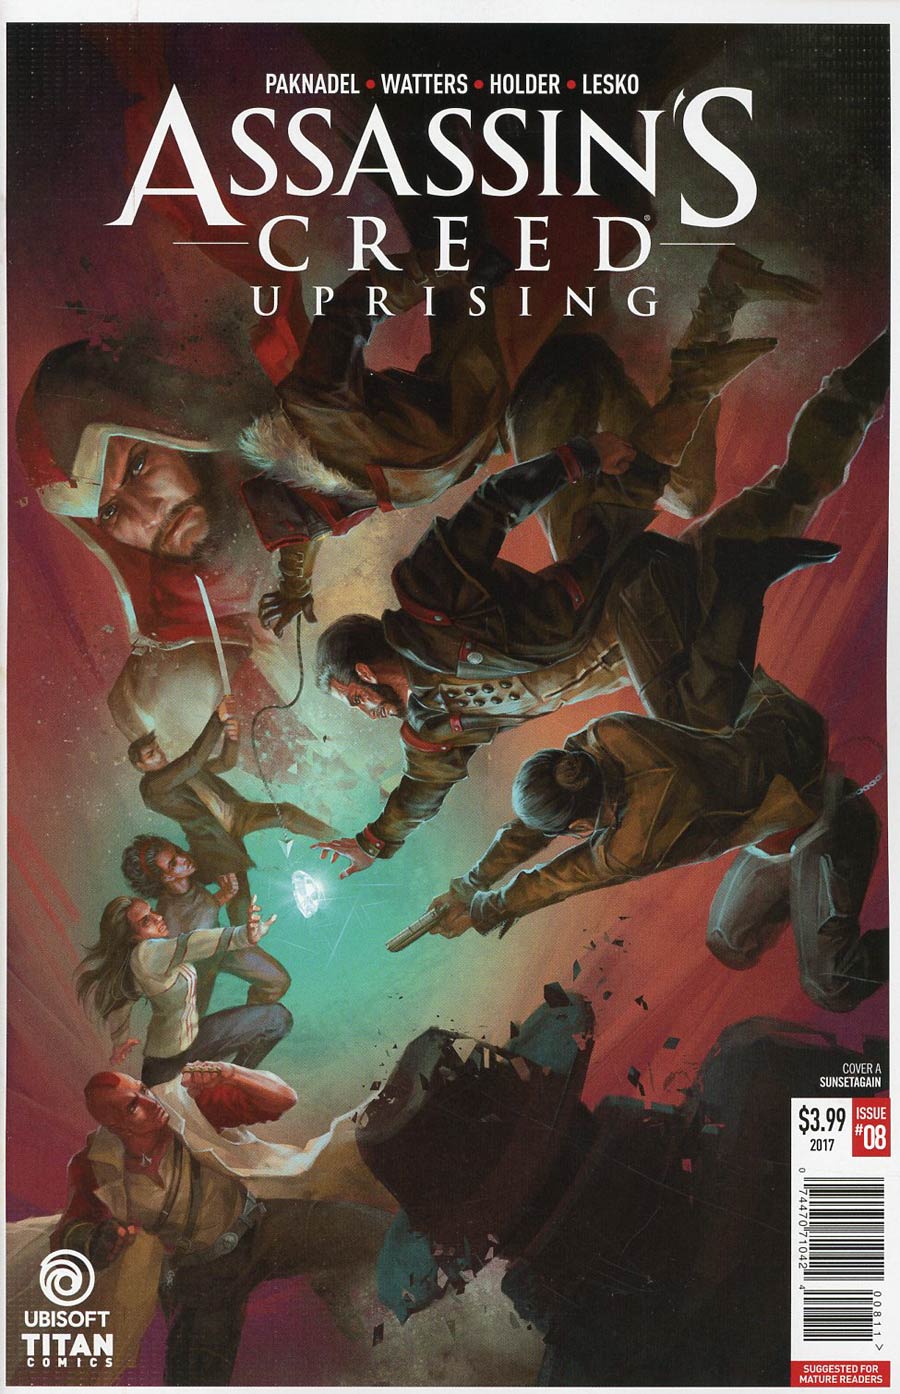 Assassins Creed Uprising #8 Cover A Regular Sunsetagain Cover